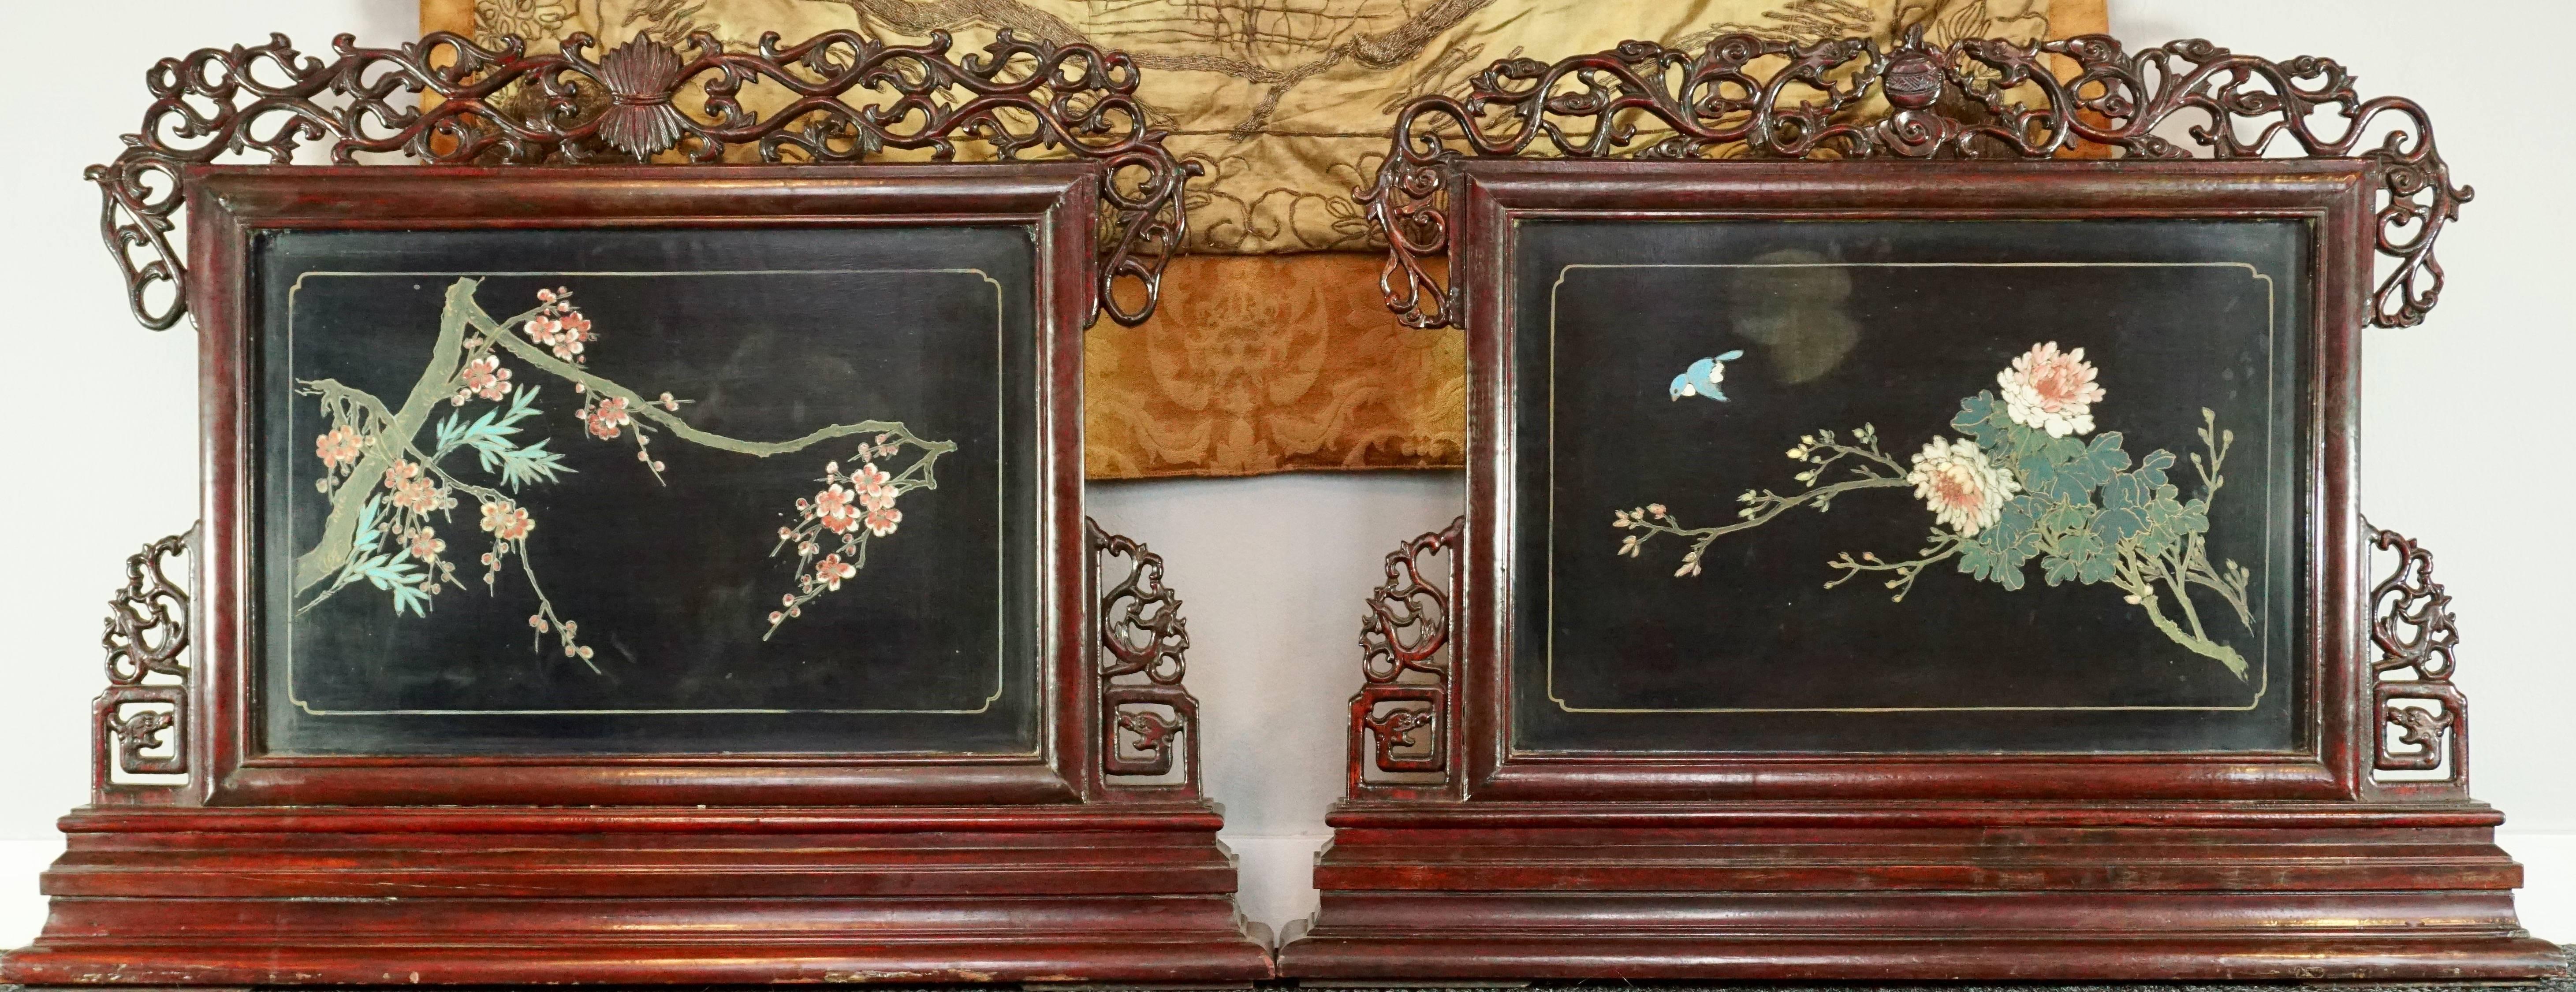 Pair of large Chinese Republic period hardstone jade mounted screans. Late Qing to Republic period 20th century heavy lacquered panels with carved ornate scrolling. Panels have intricate carved stones representing exotic birds (sparrows, swallows